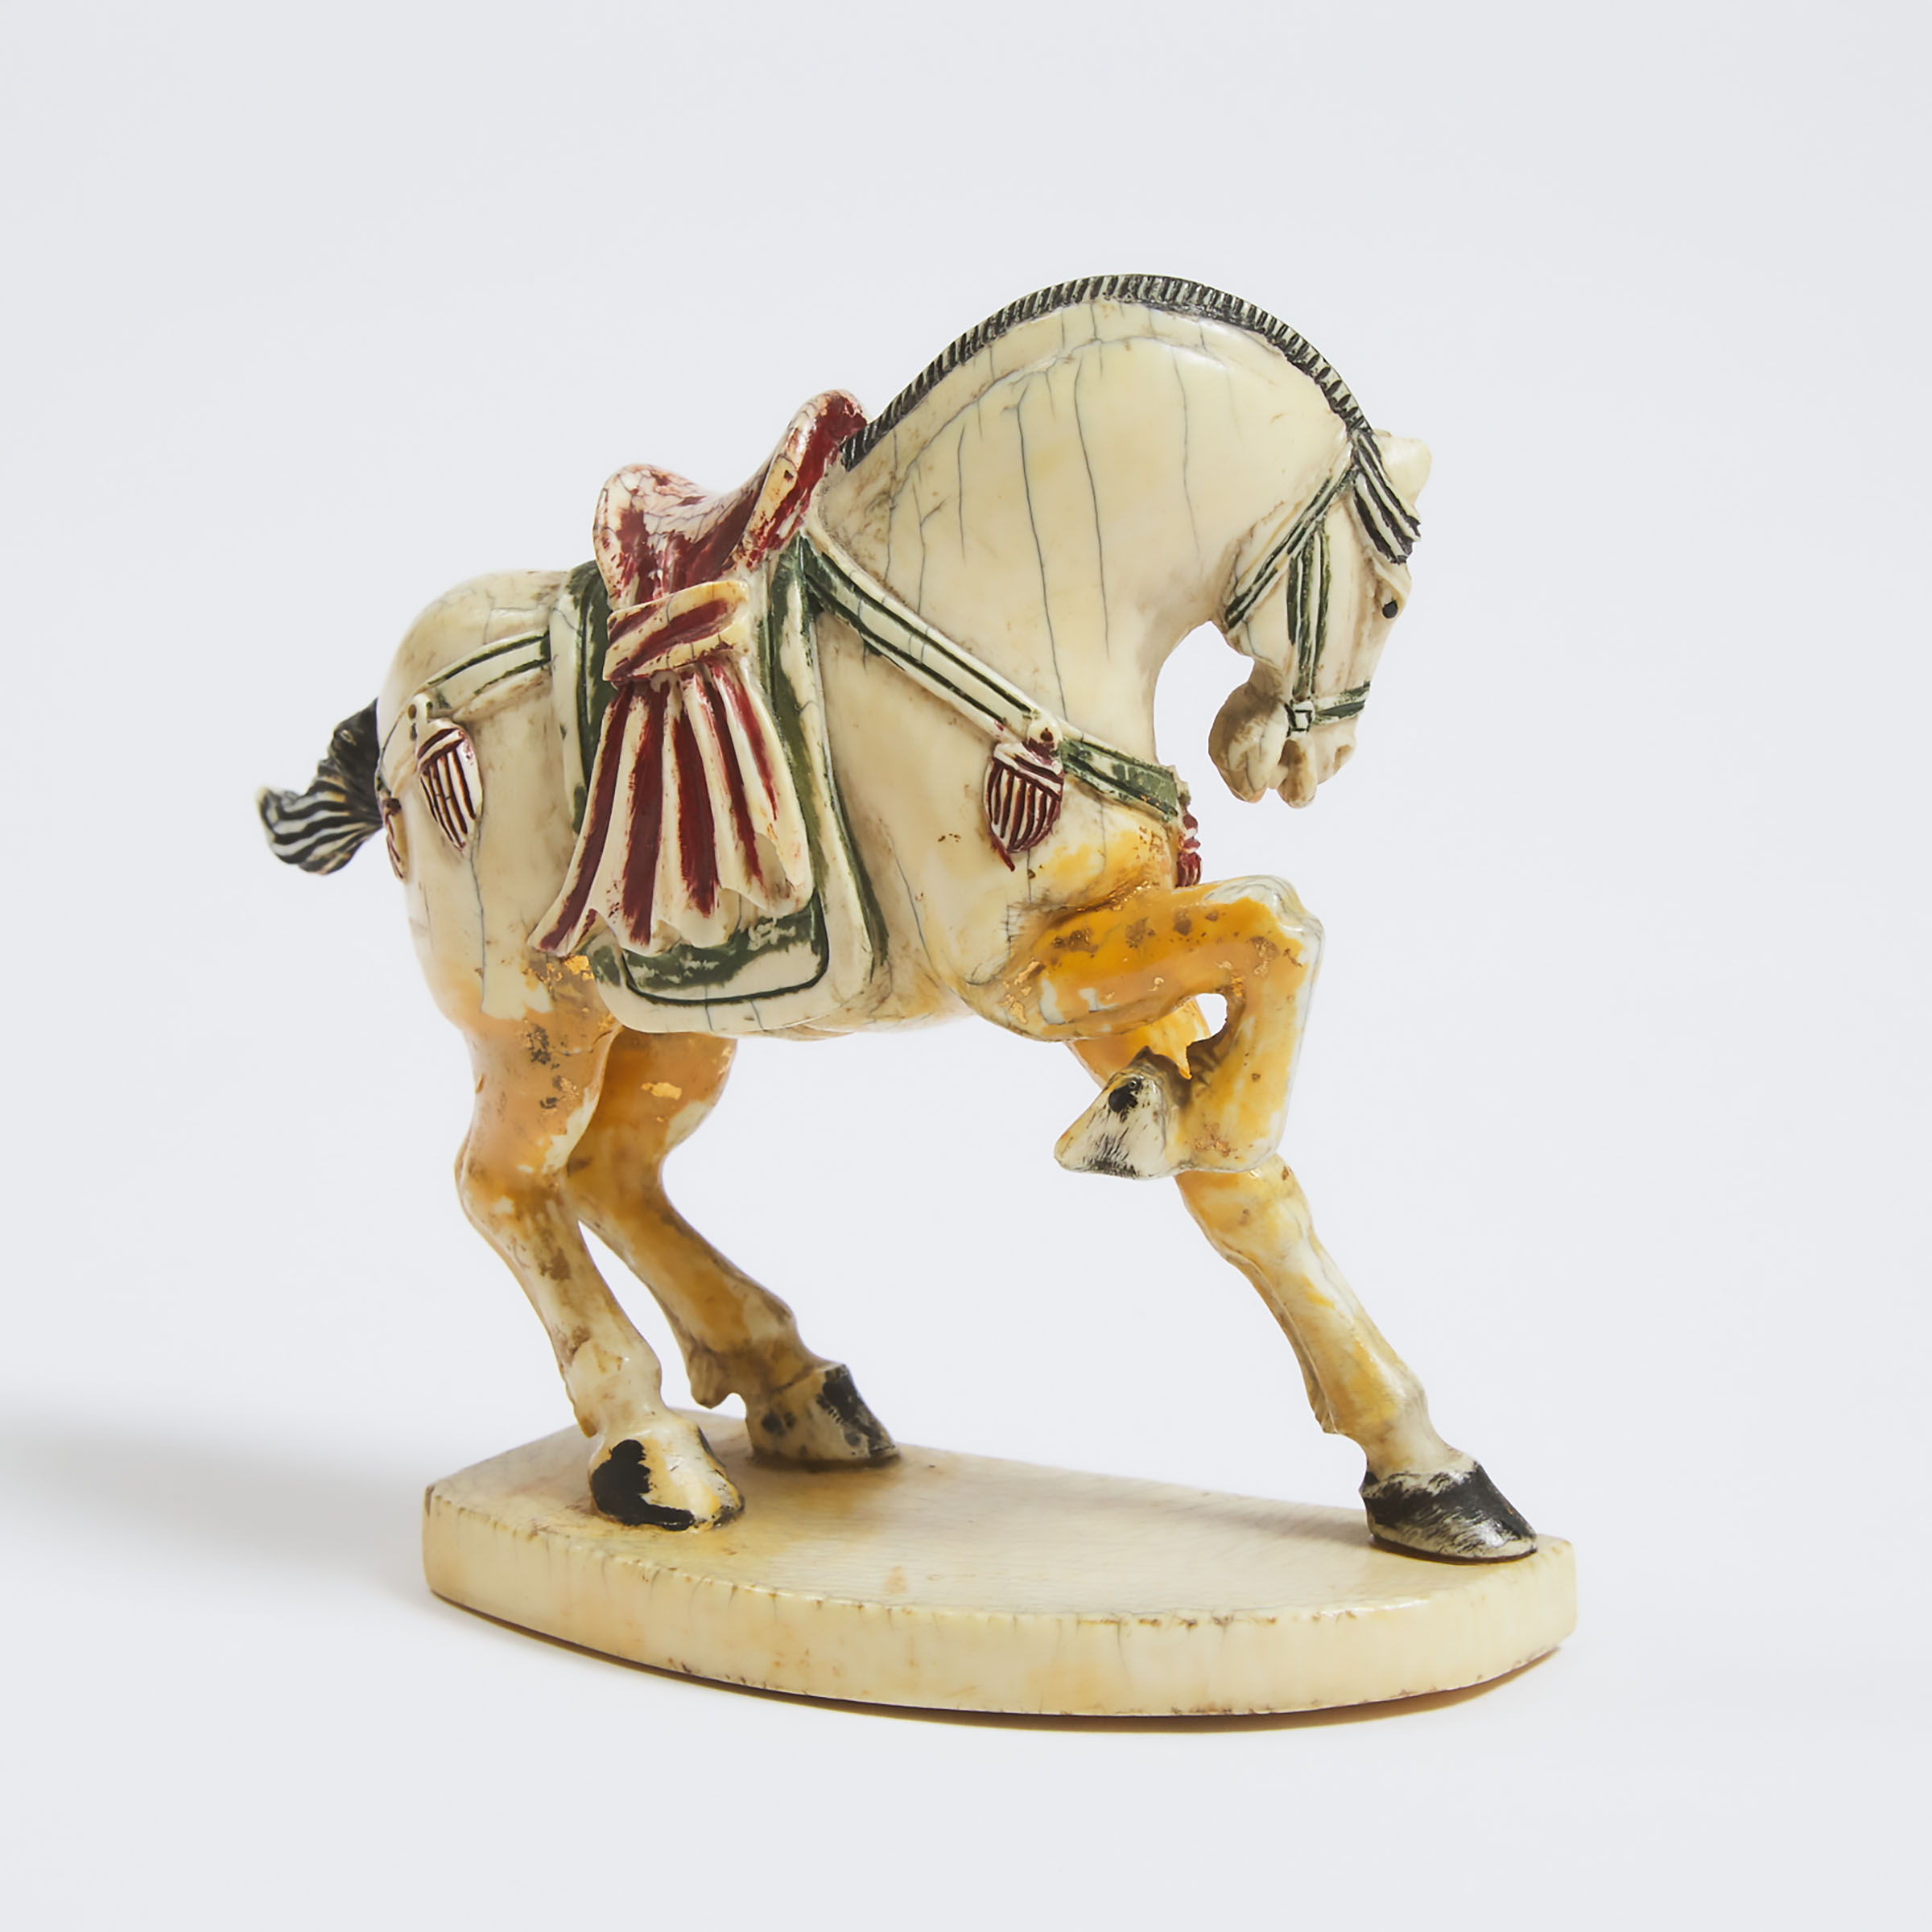 A Polychrome Ivory Figure of a Horse, 19th Century